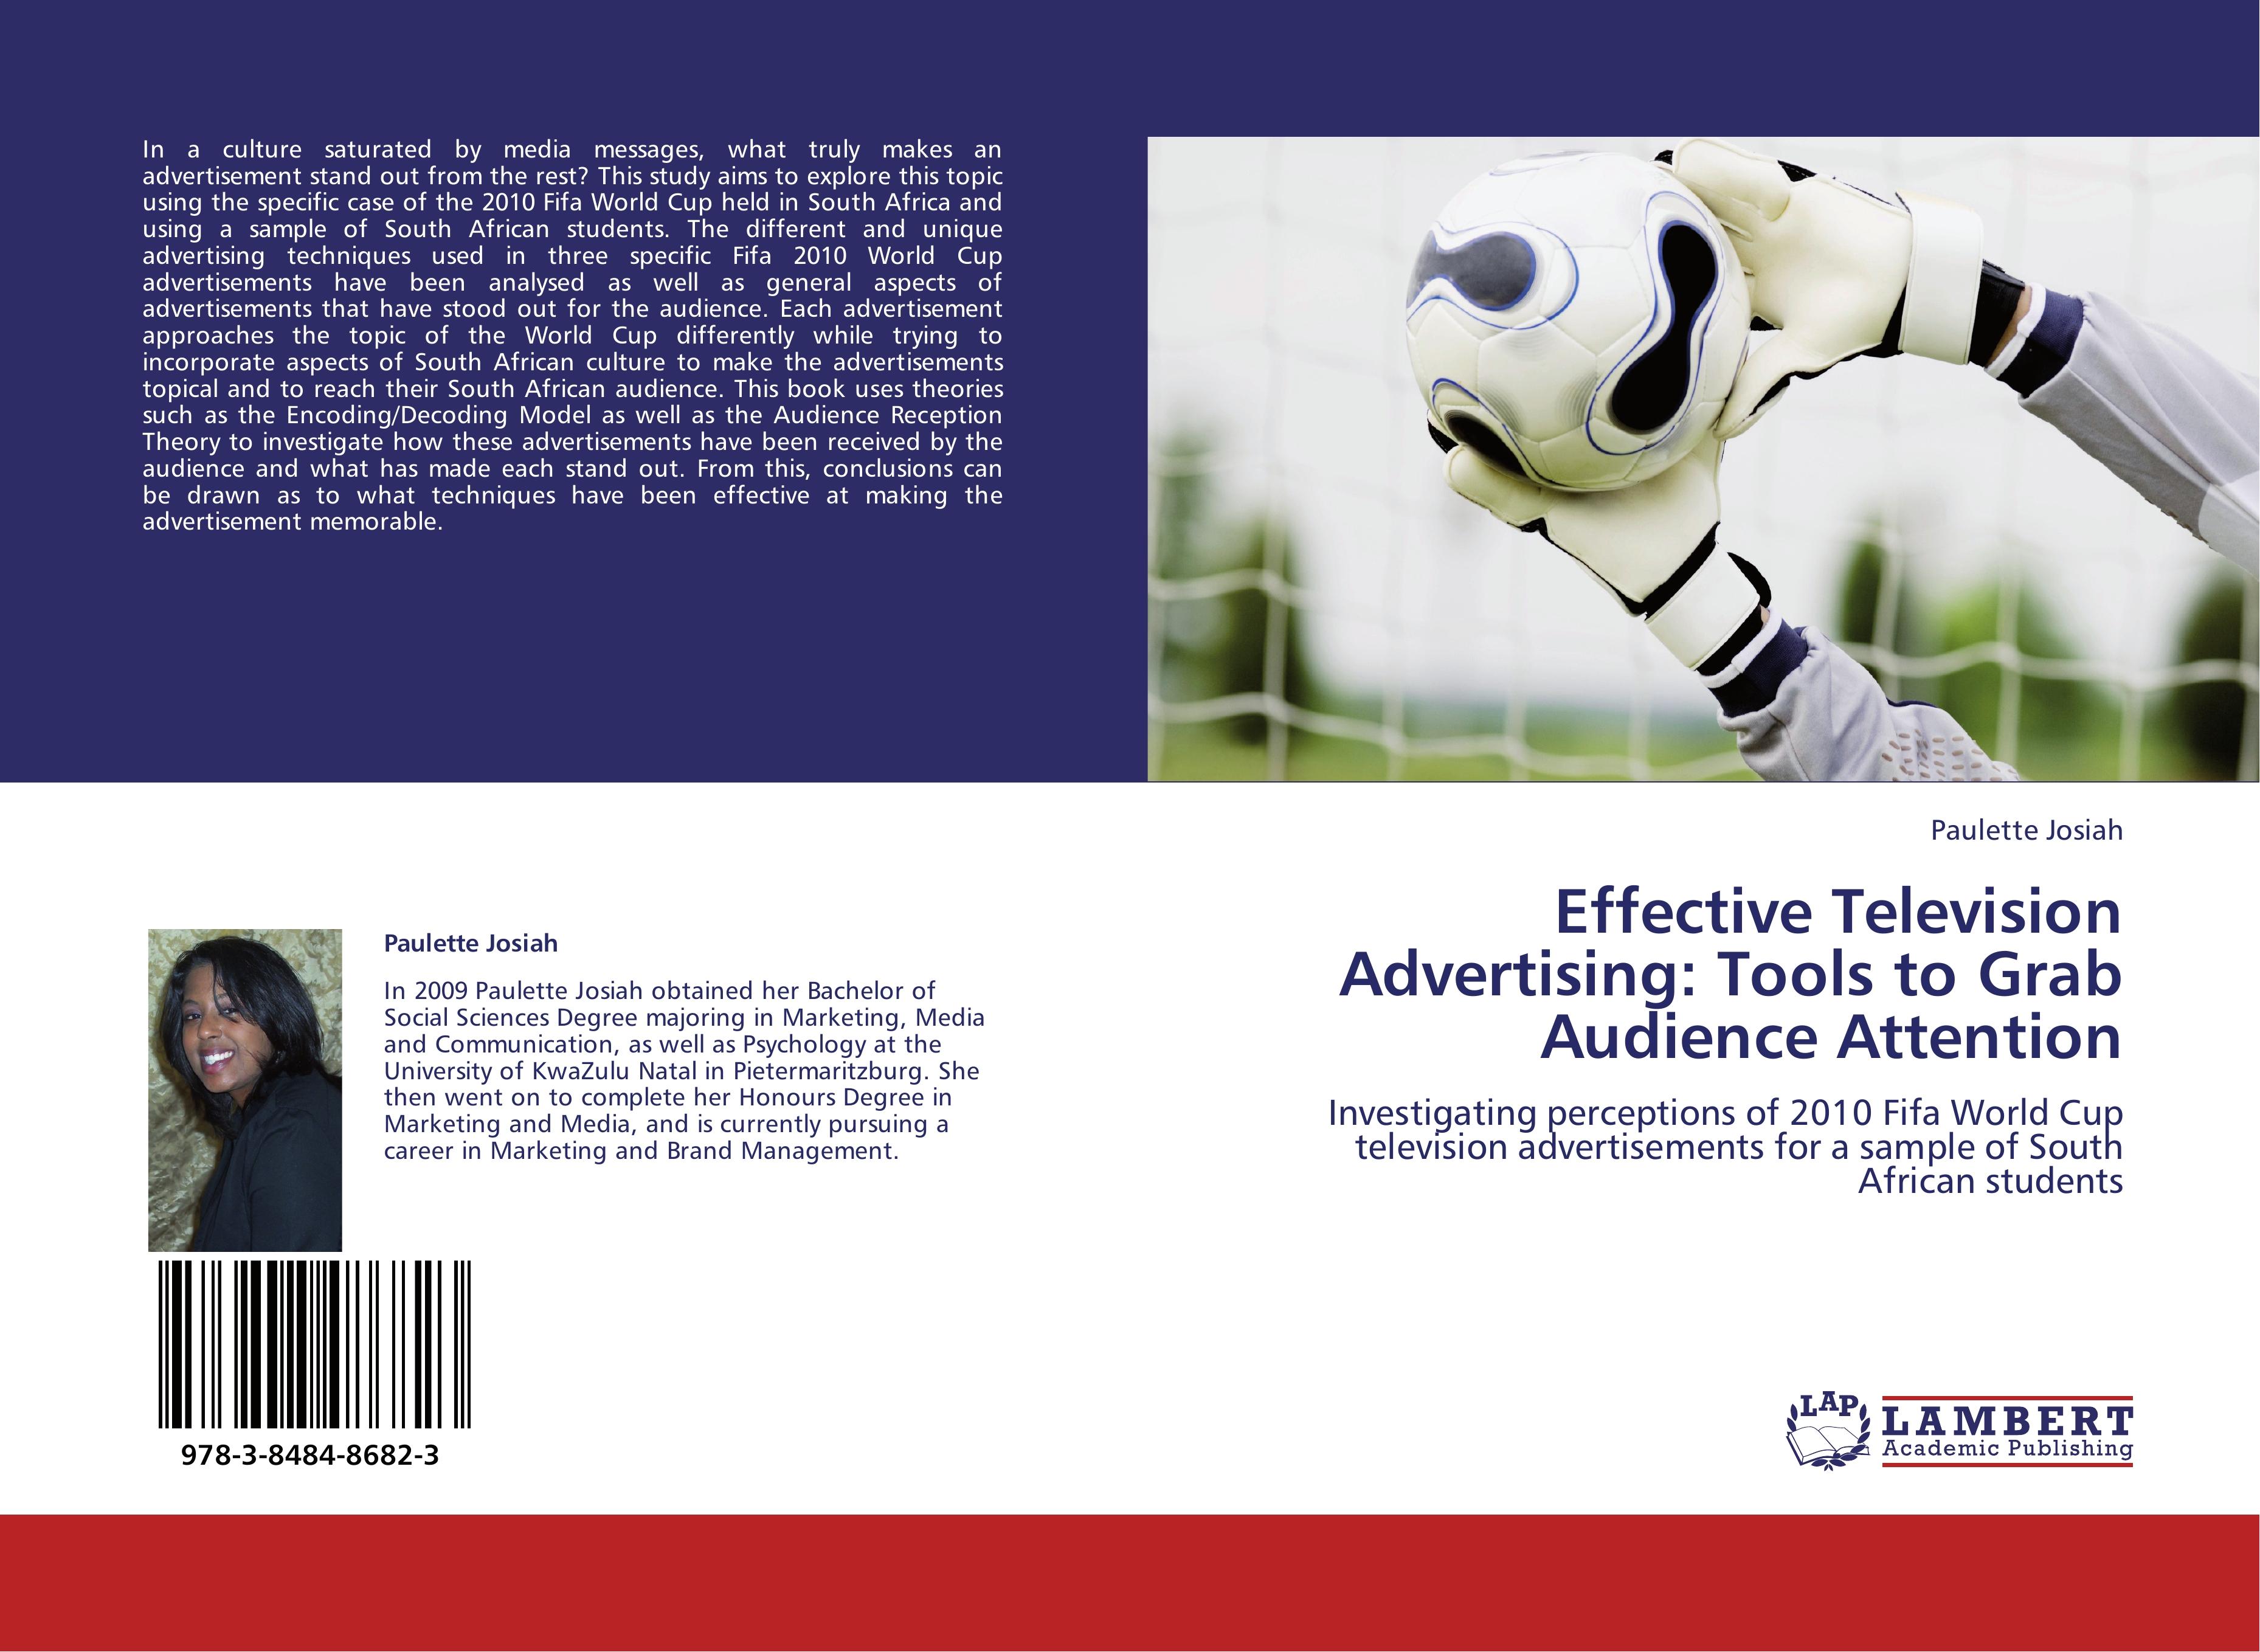 Effective Television Advertising: Tools to Grab Audience Attention - Paulette Josiah